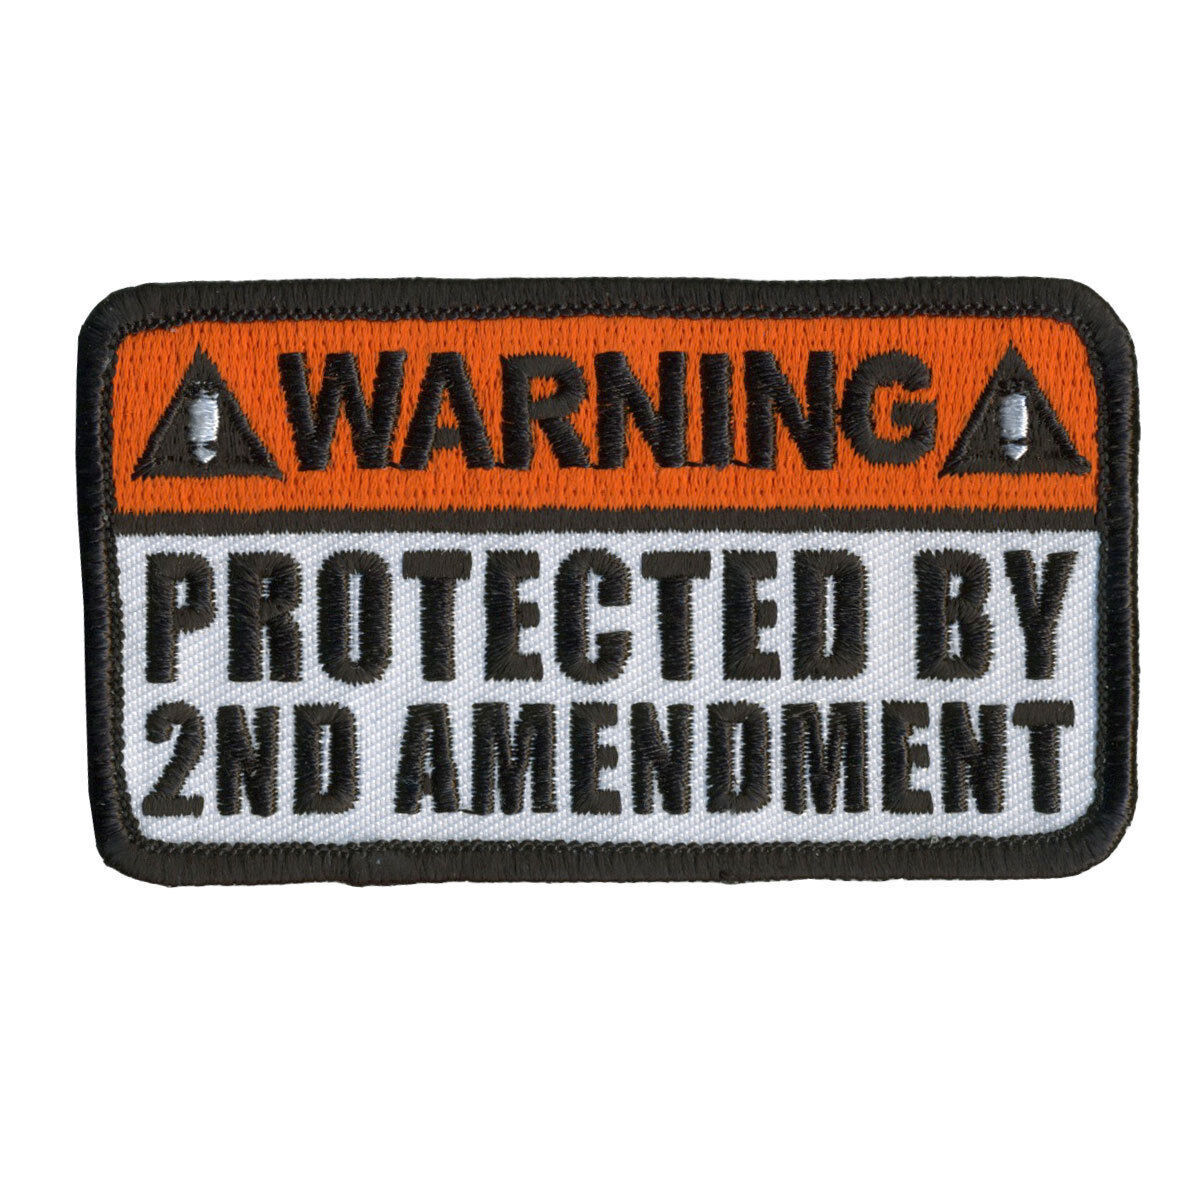 Protected by 2nd Amendment NRA Patch [IRON ON SEW ON - 3.5 X 2.0 inch]